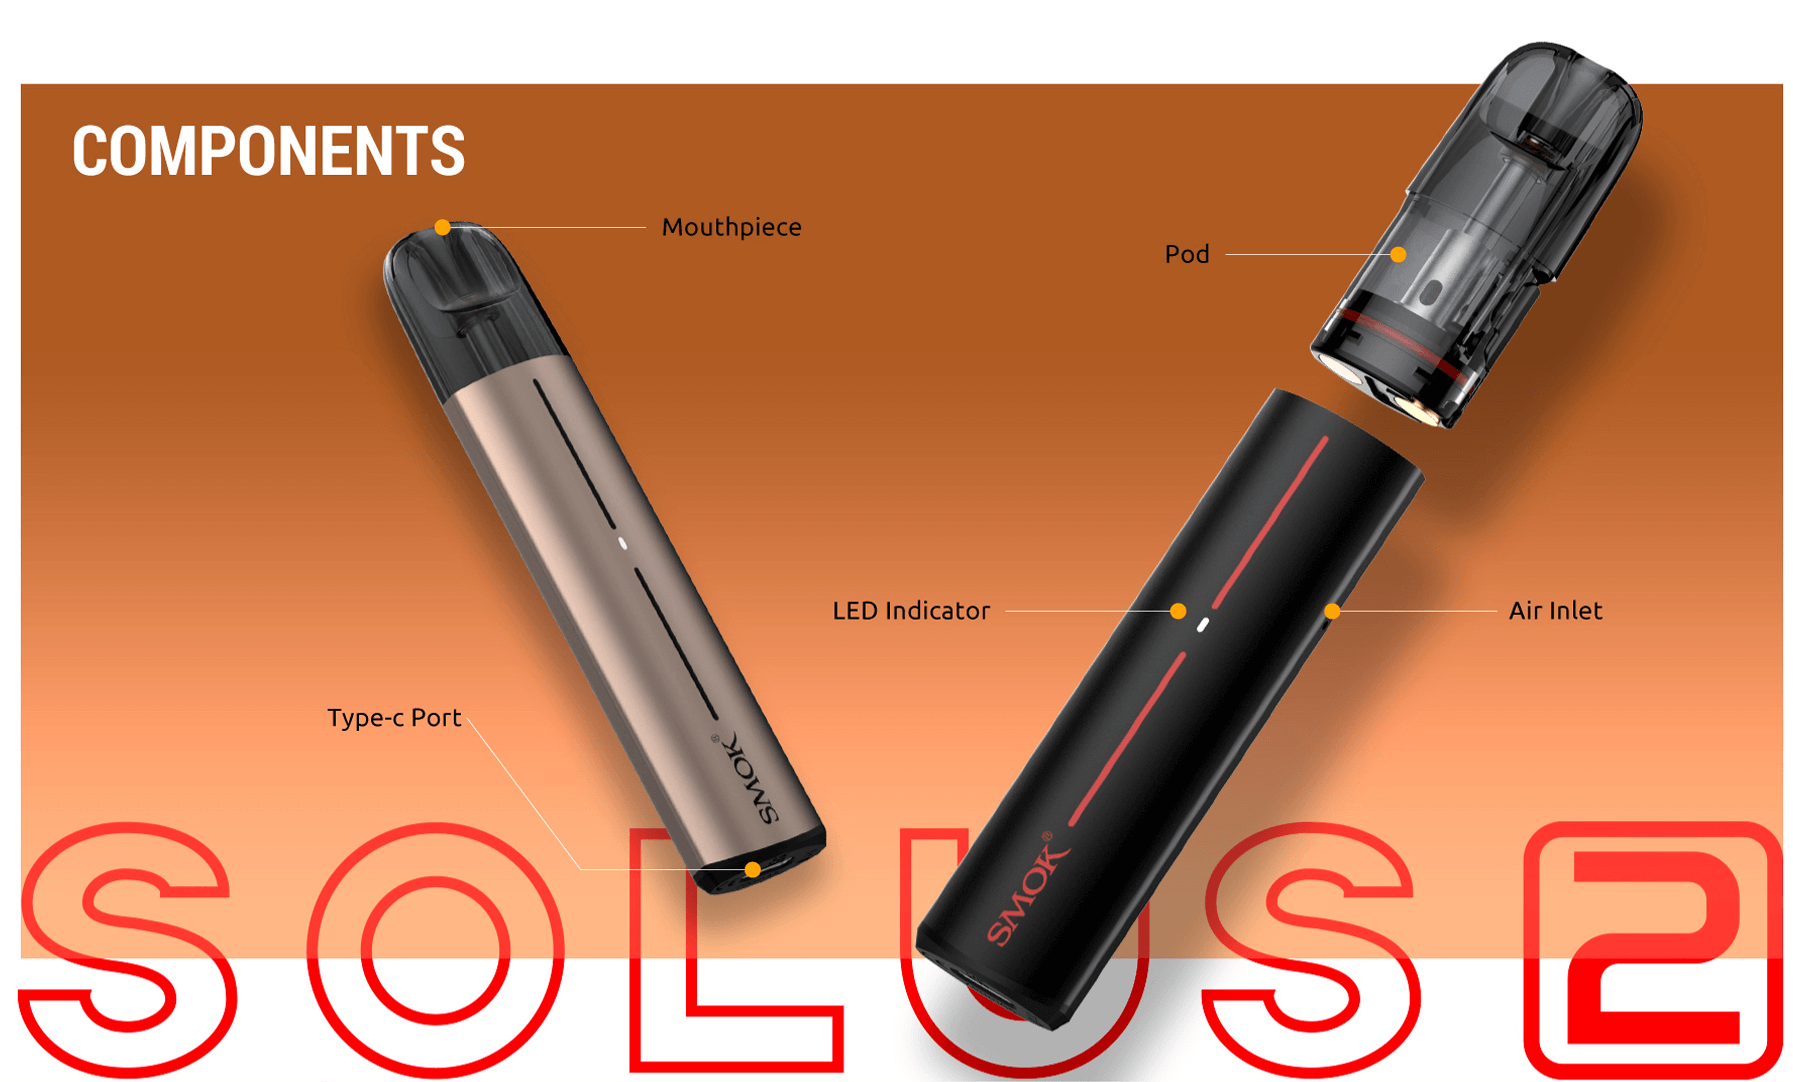 Smok Solus 2 components